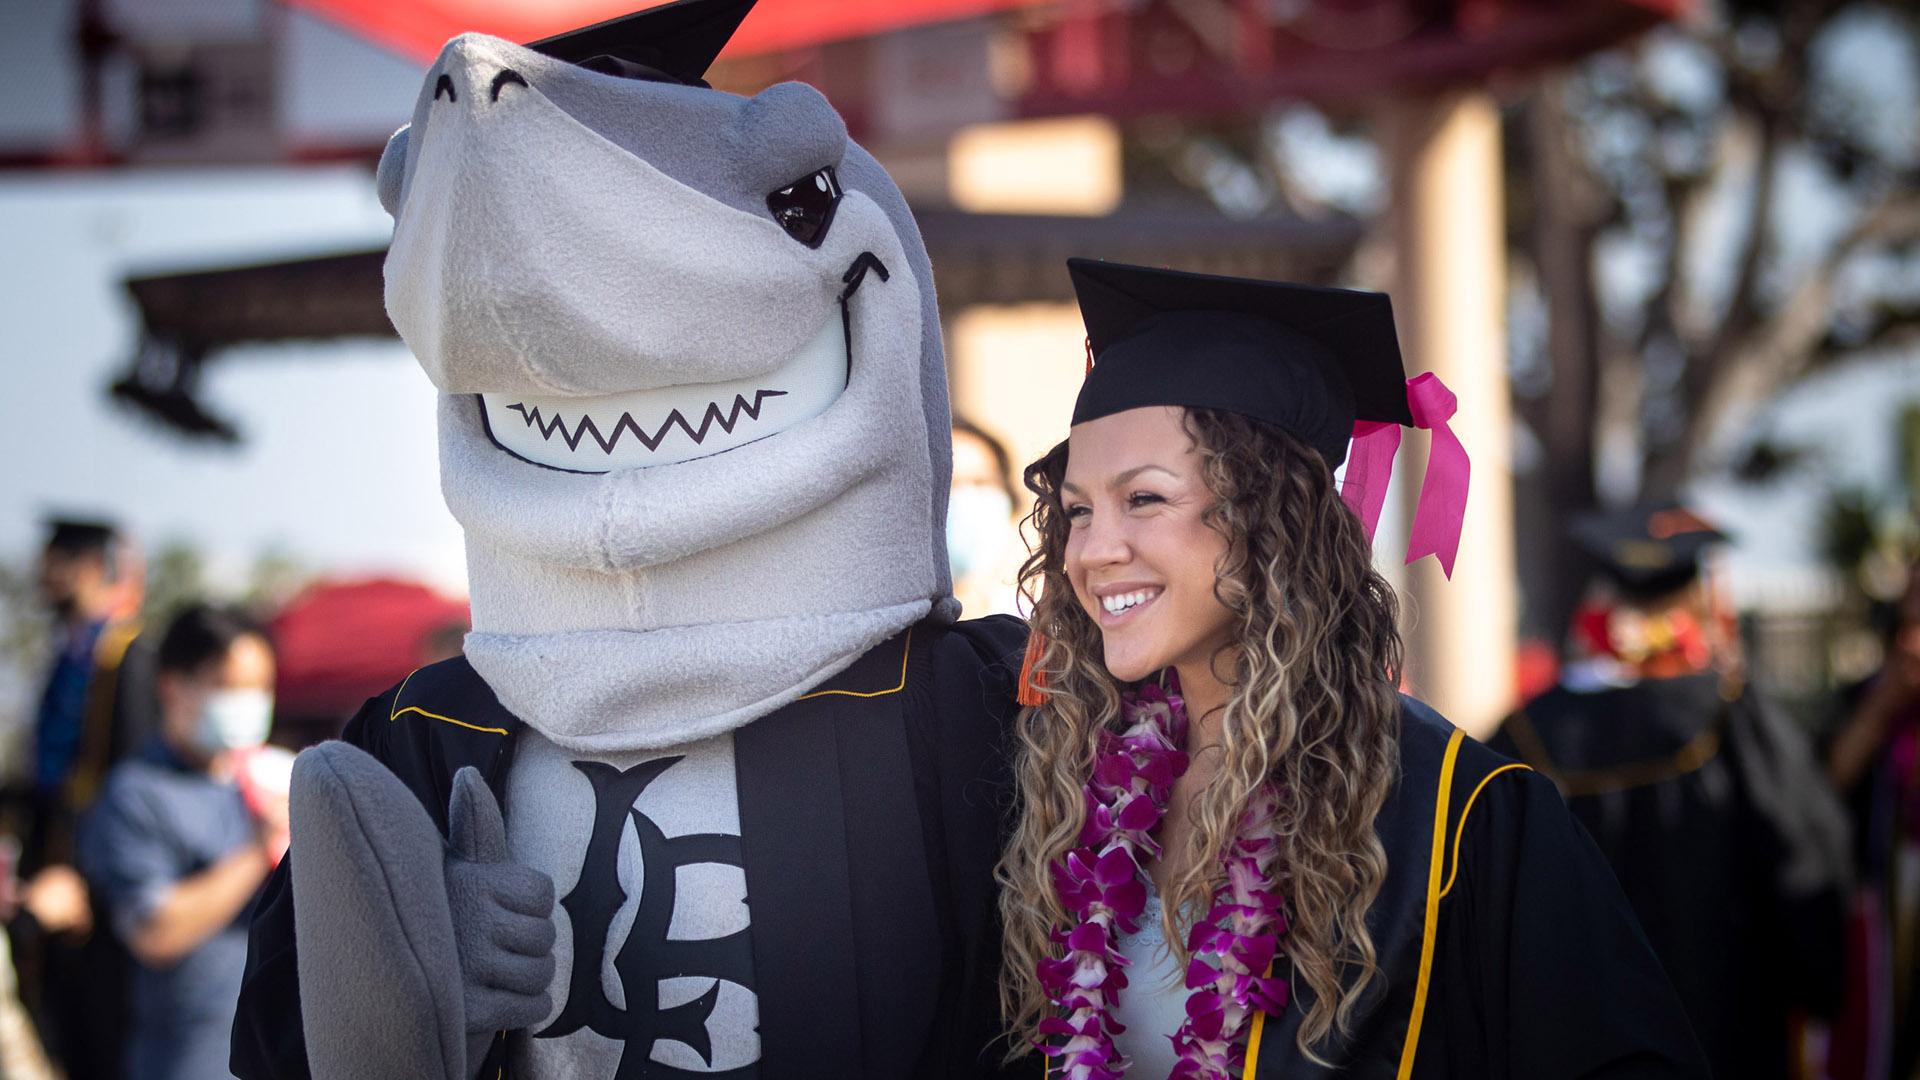 Female graduate student poses with Elbee the shark mascot